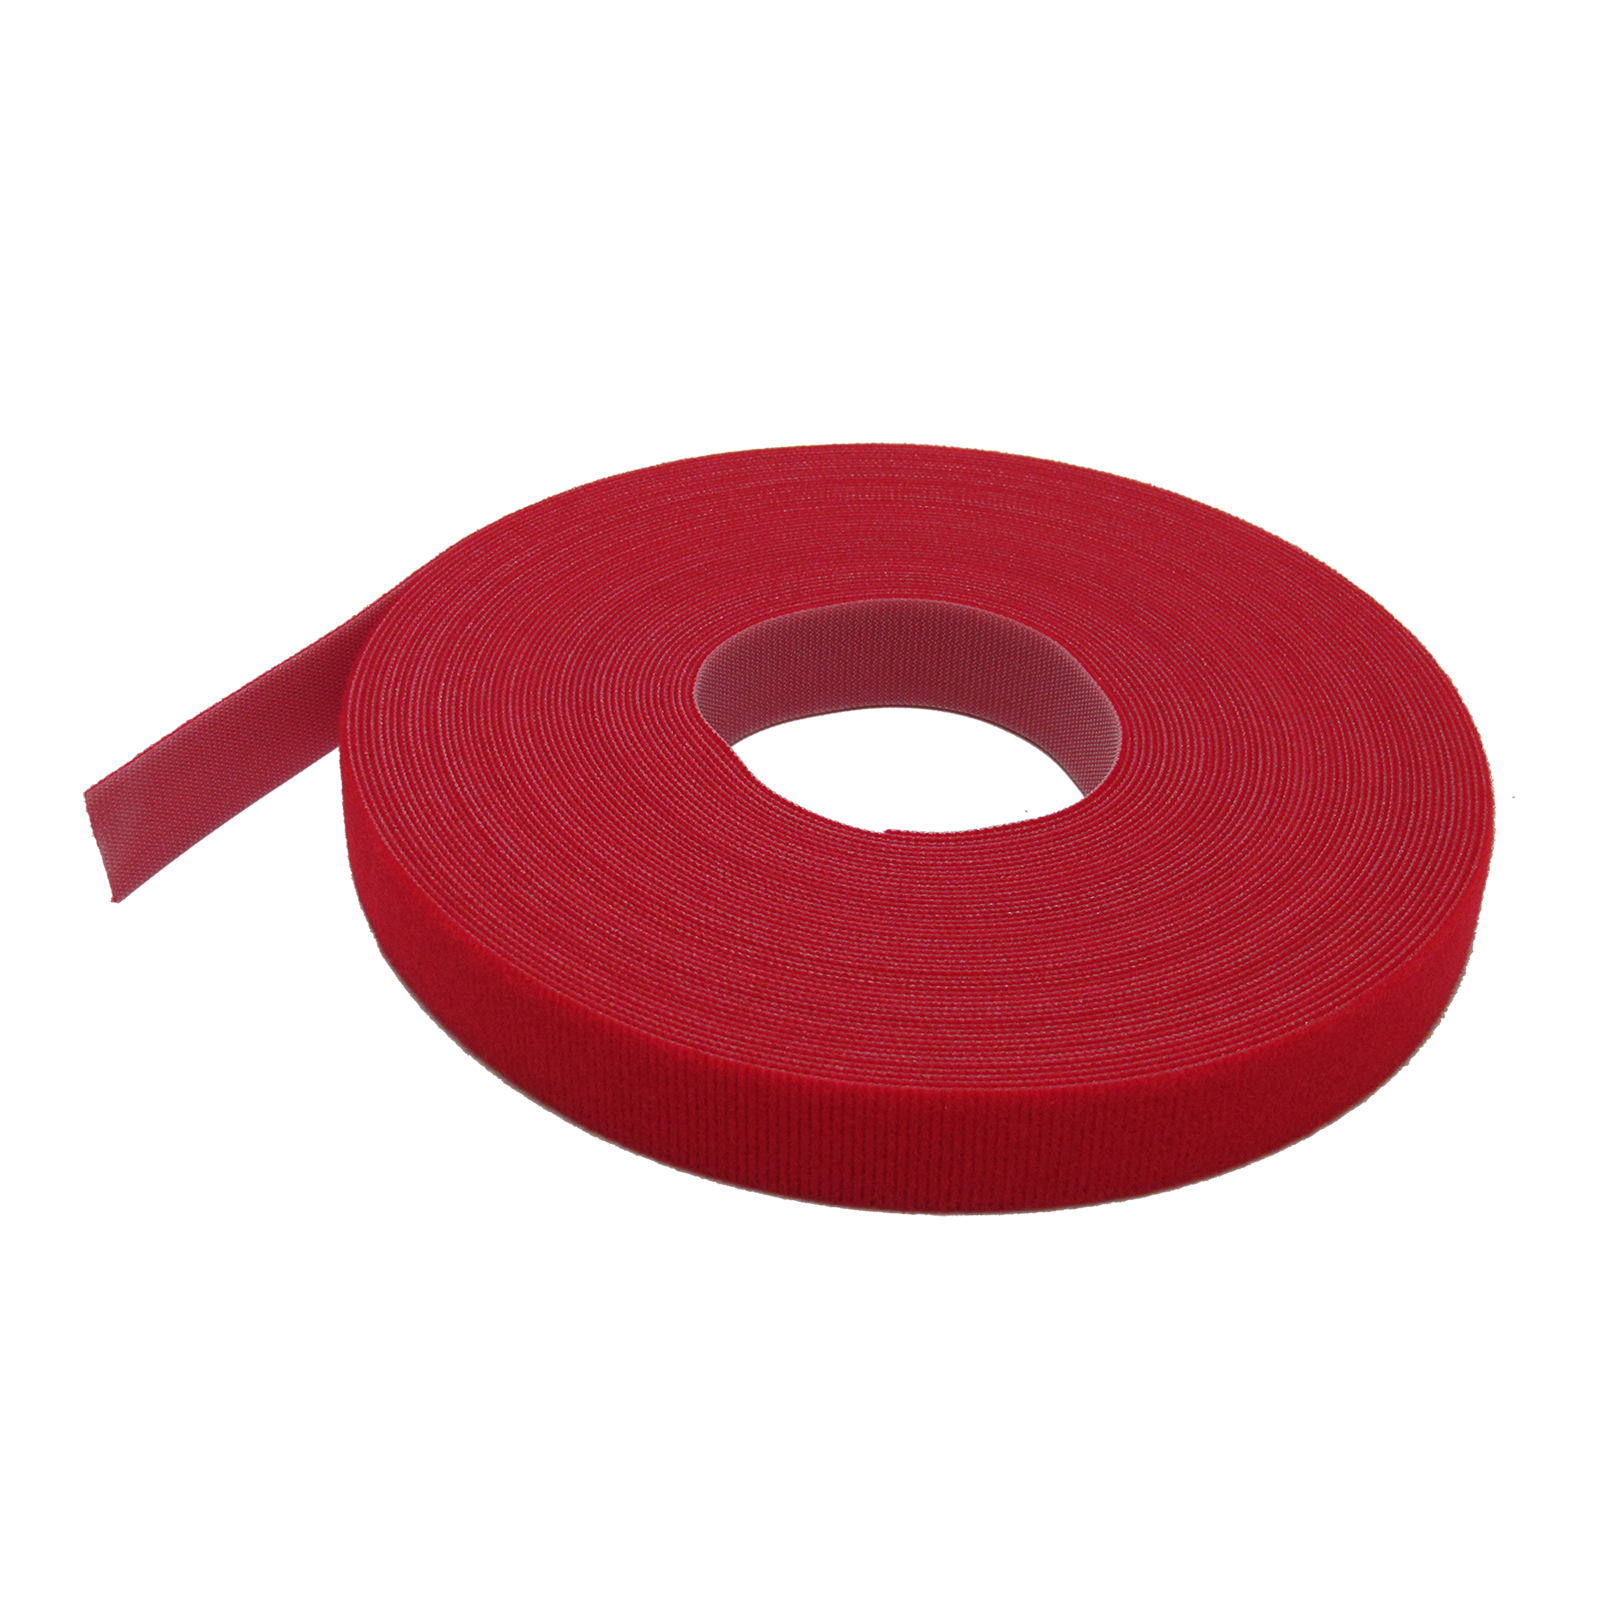 1/2 RED VELCRO® BRAND VELCOIN® LOOP ADHESIVE BACKED - COINS